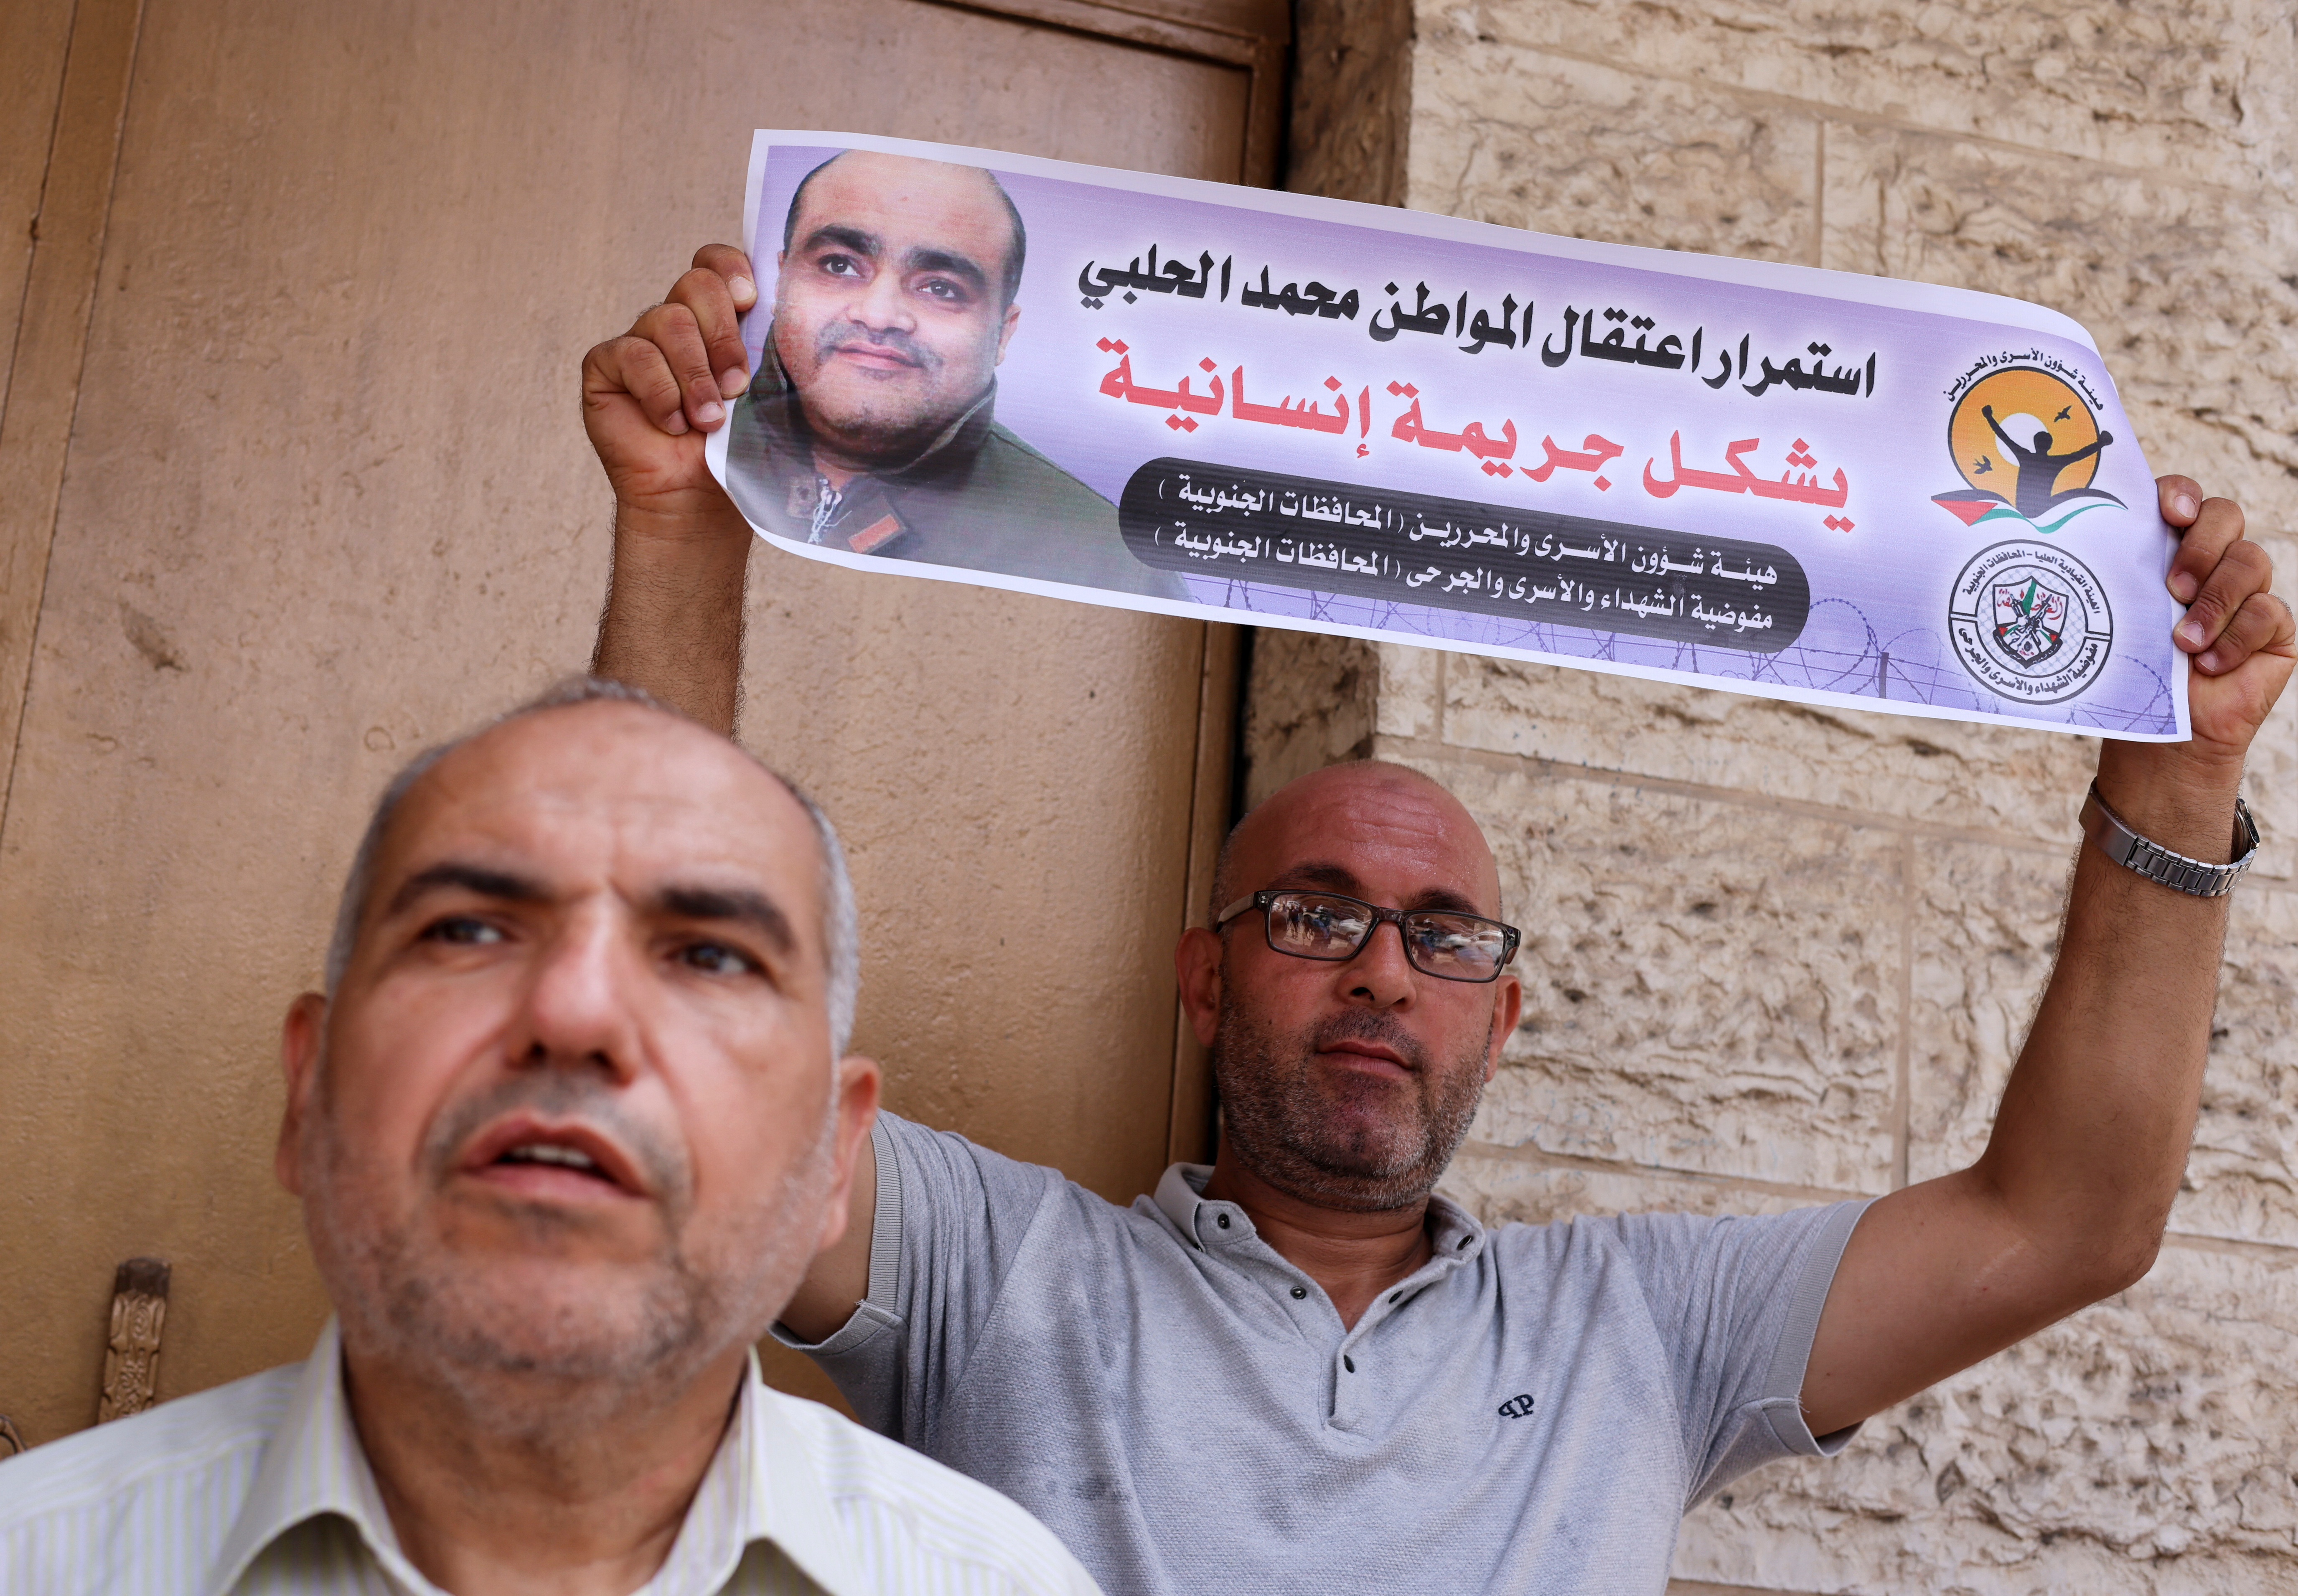 A man holds a picture of Mohammad El Halabi, during a solidarity gathering following an Israeli court decision to sentence him for 12 years, outside the office of the International Committee of the Red Cross in Gaza City